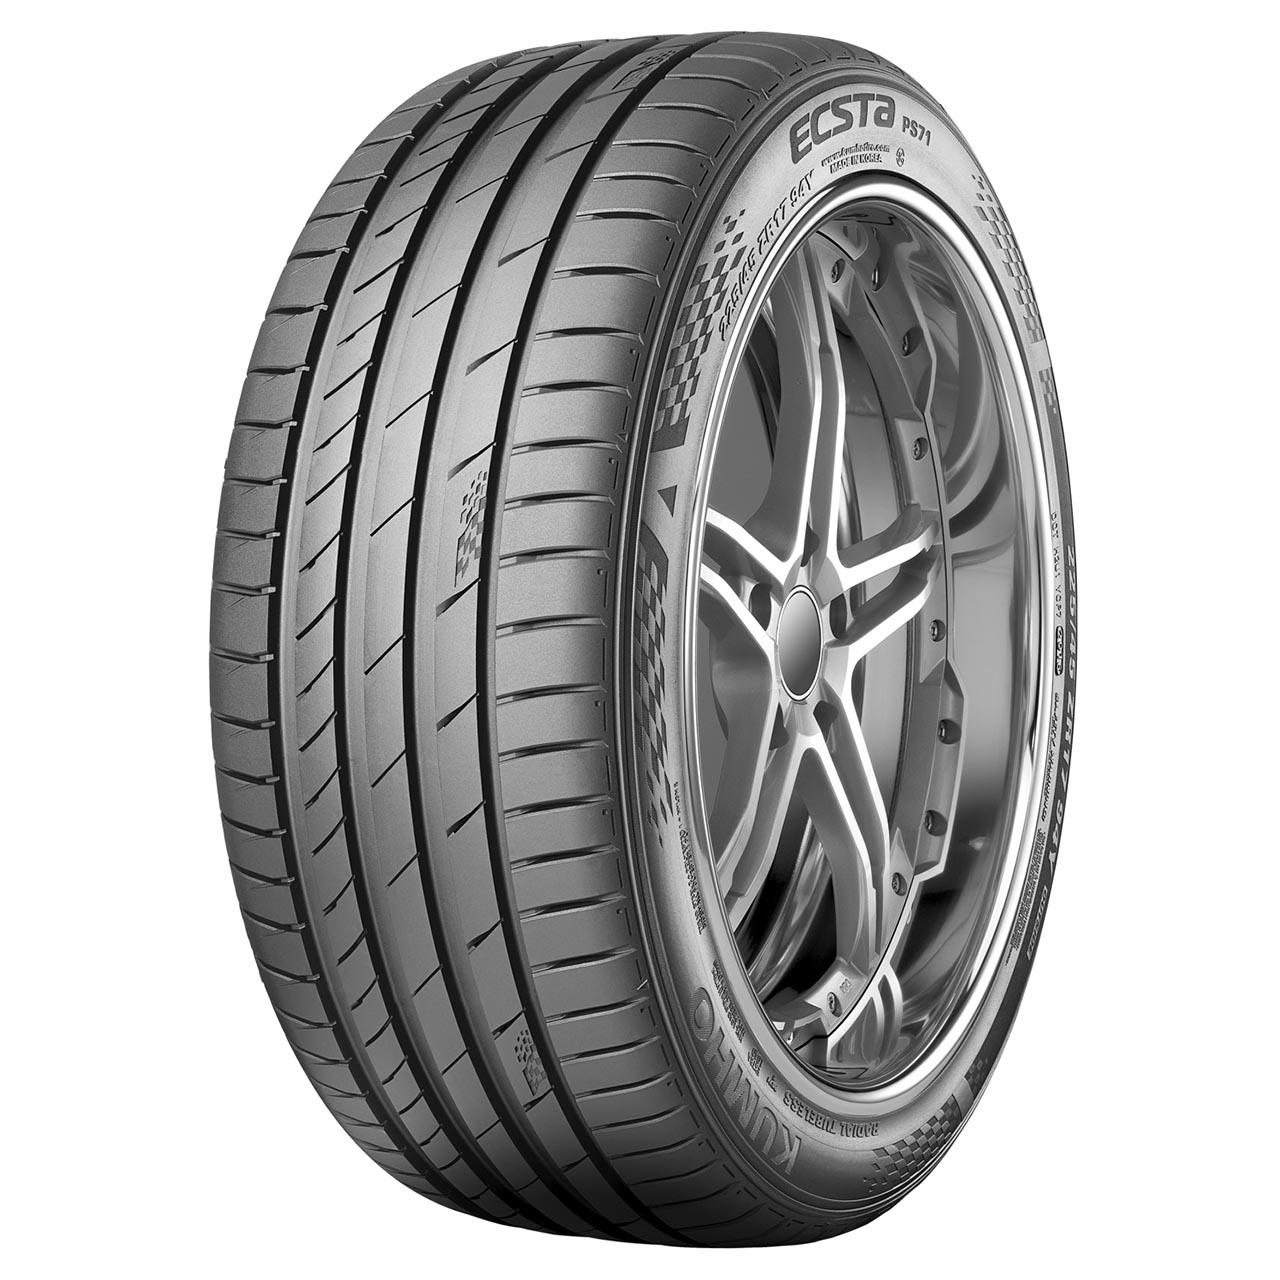 Kumho Ecsta PS71 245/50ZR18 100Y XRP